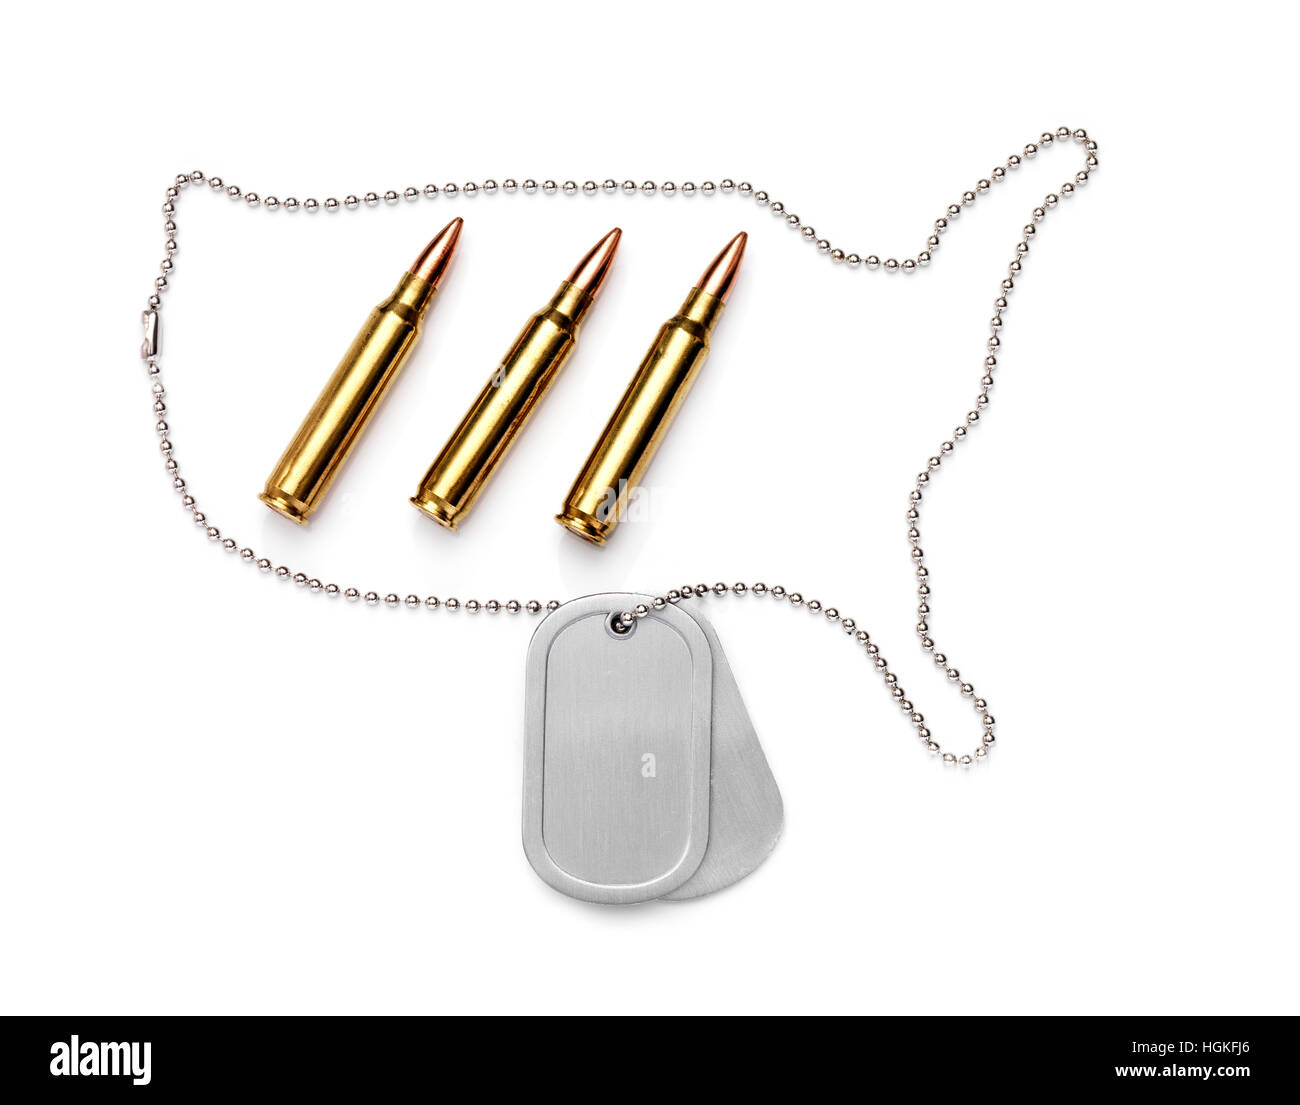 Isolated Dog Tag with bullets Stock Photo